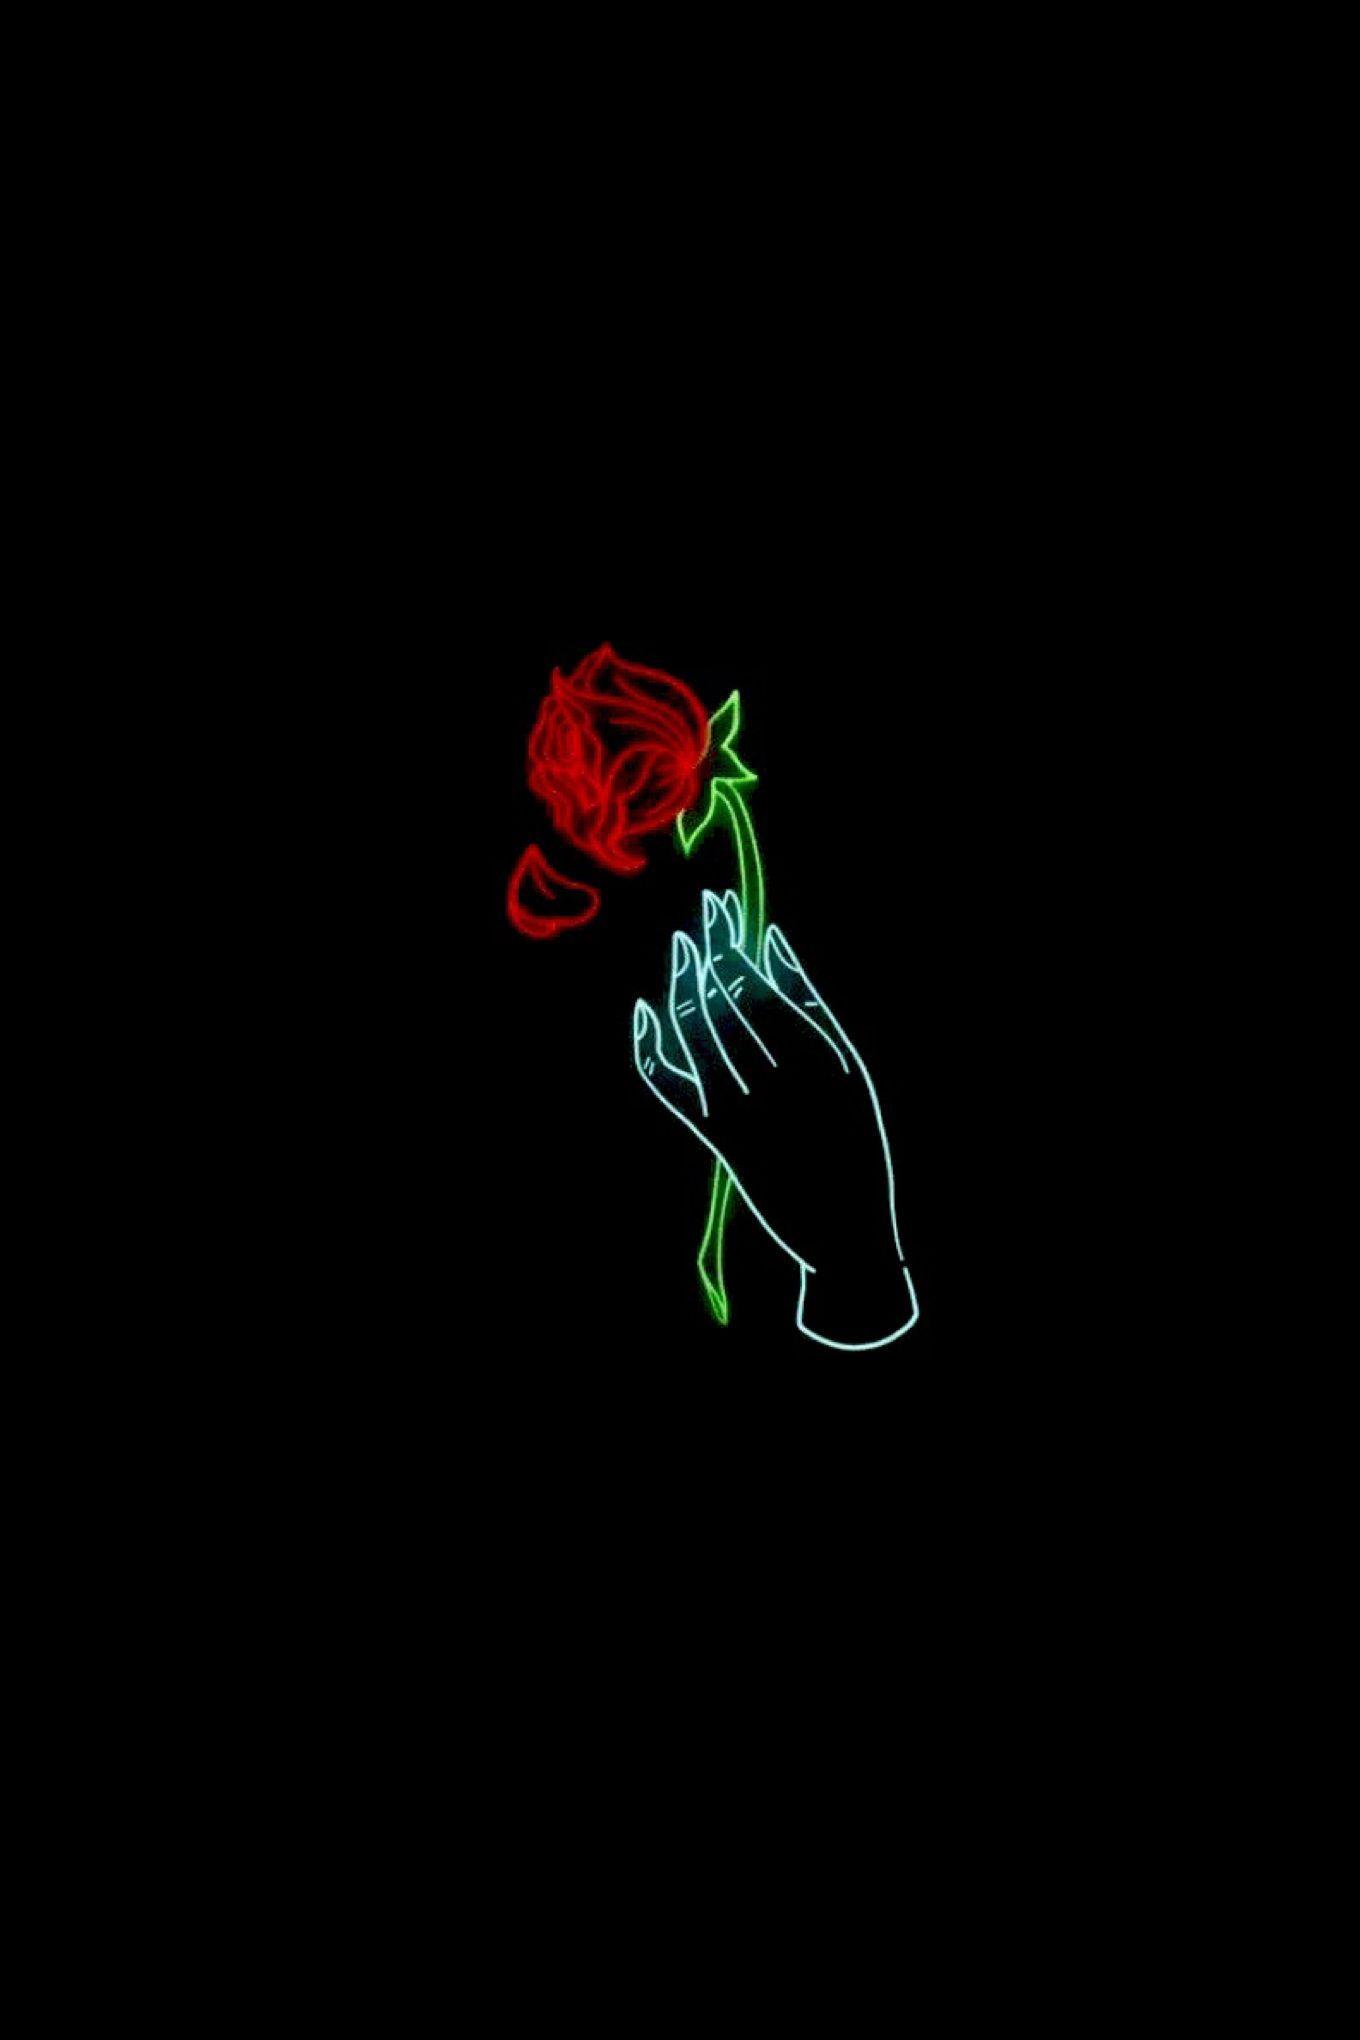 Neon Blue Aesthetic Wallpaper Roses / Download and use 10,000+ neon ...